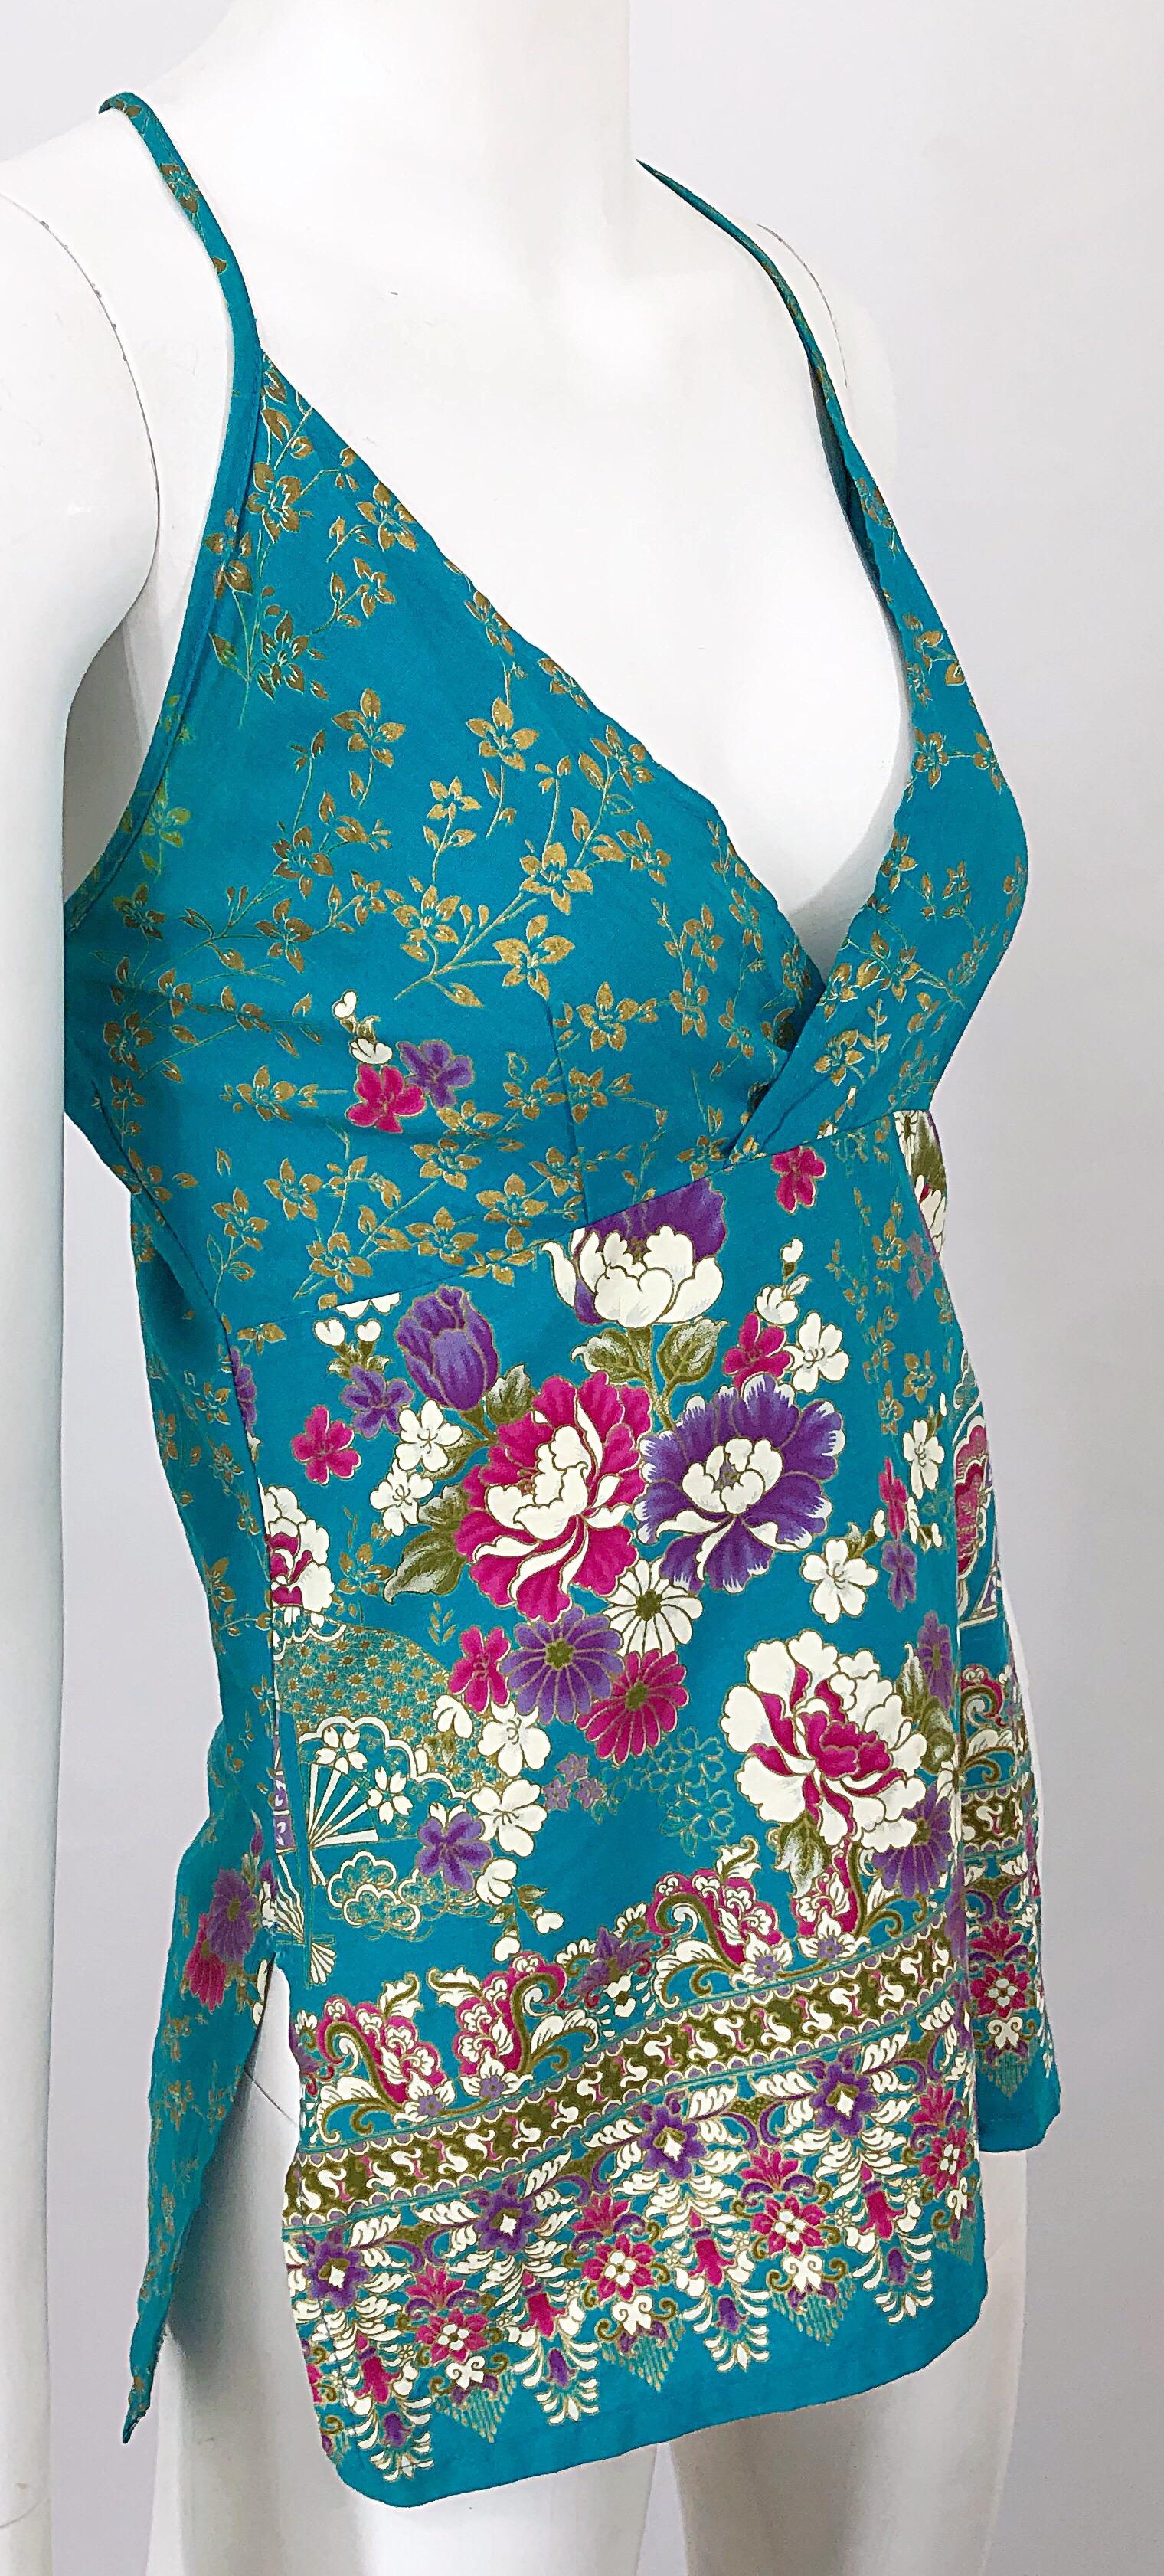 1970s Teal Blue + Gold + Pink Hand Painted Boho Vintage 70s Halter Top Shirt In Excellent Condition For Sale In San Diego, CA